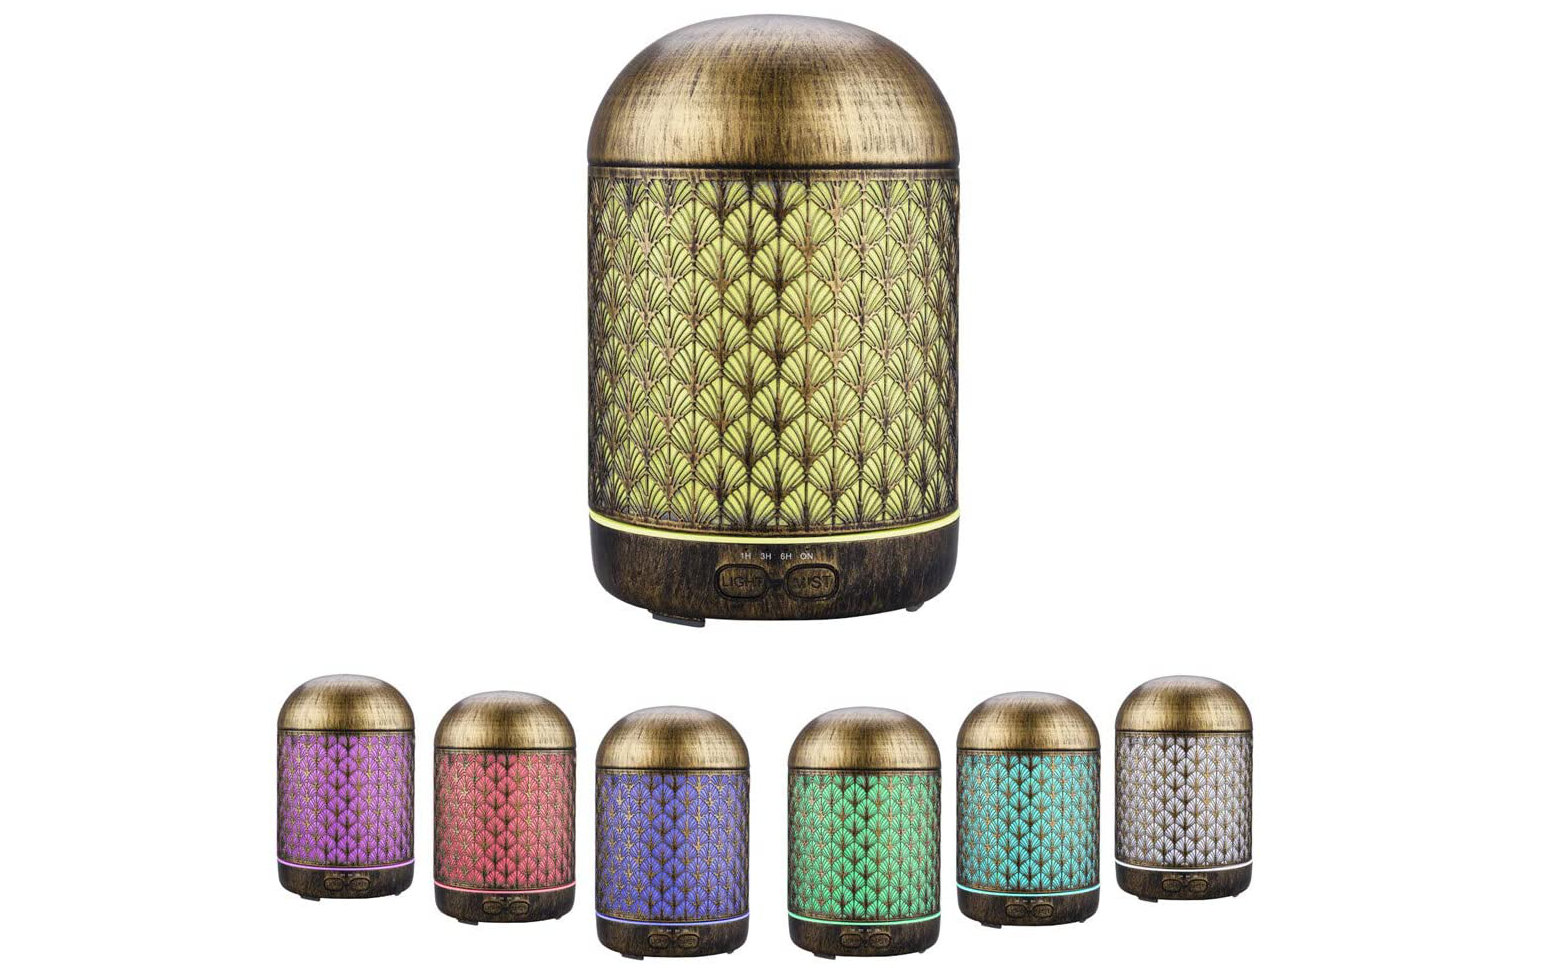 02 Essential oil diffusers: what looks like a Jukebox with an Arabian design